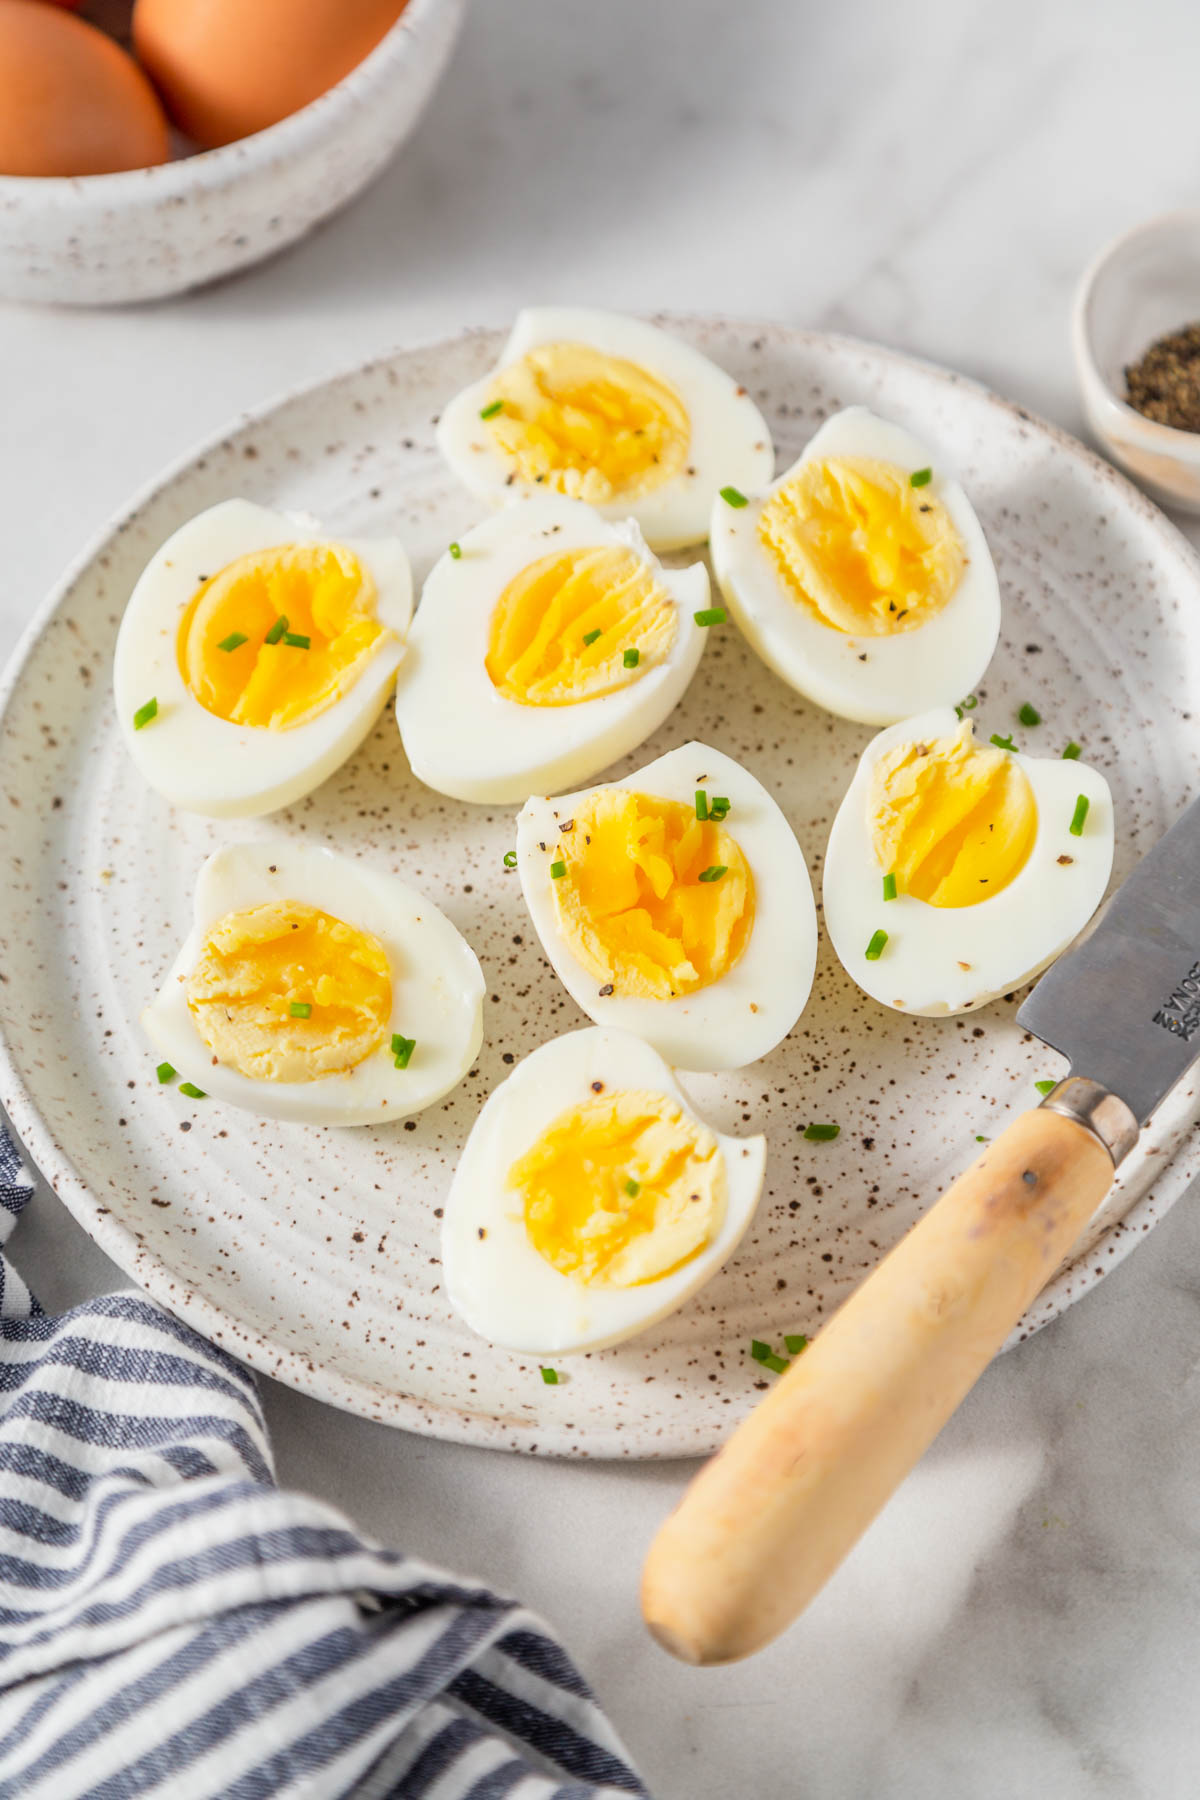 Air fryer hard boiled eggs cut in half on a plate sprinkled with black pepper.